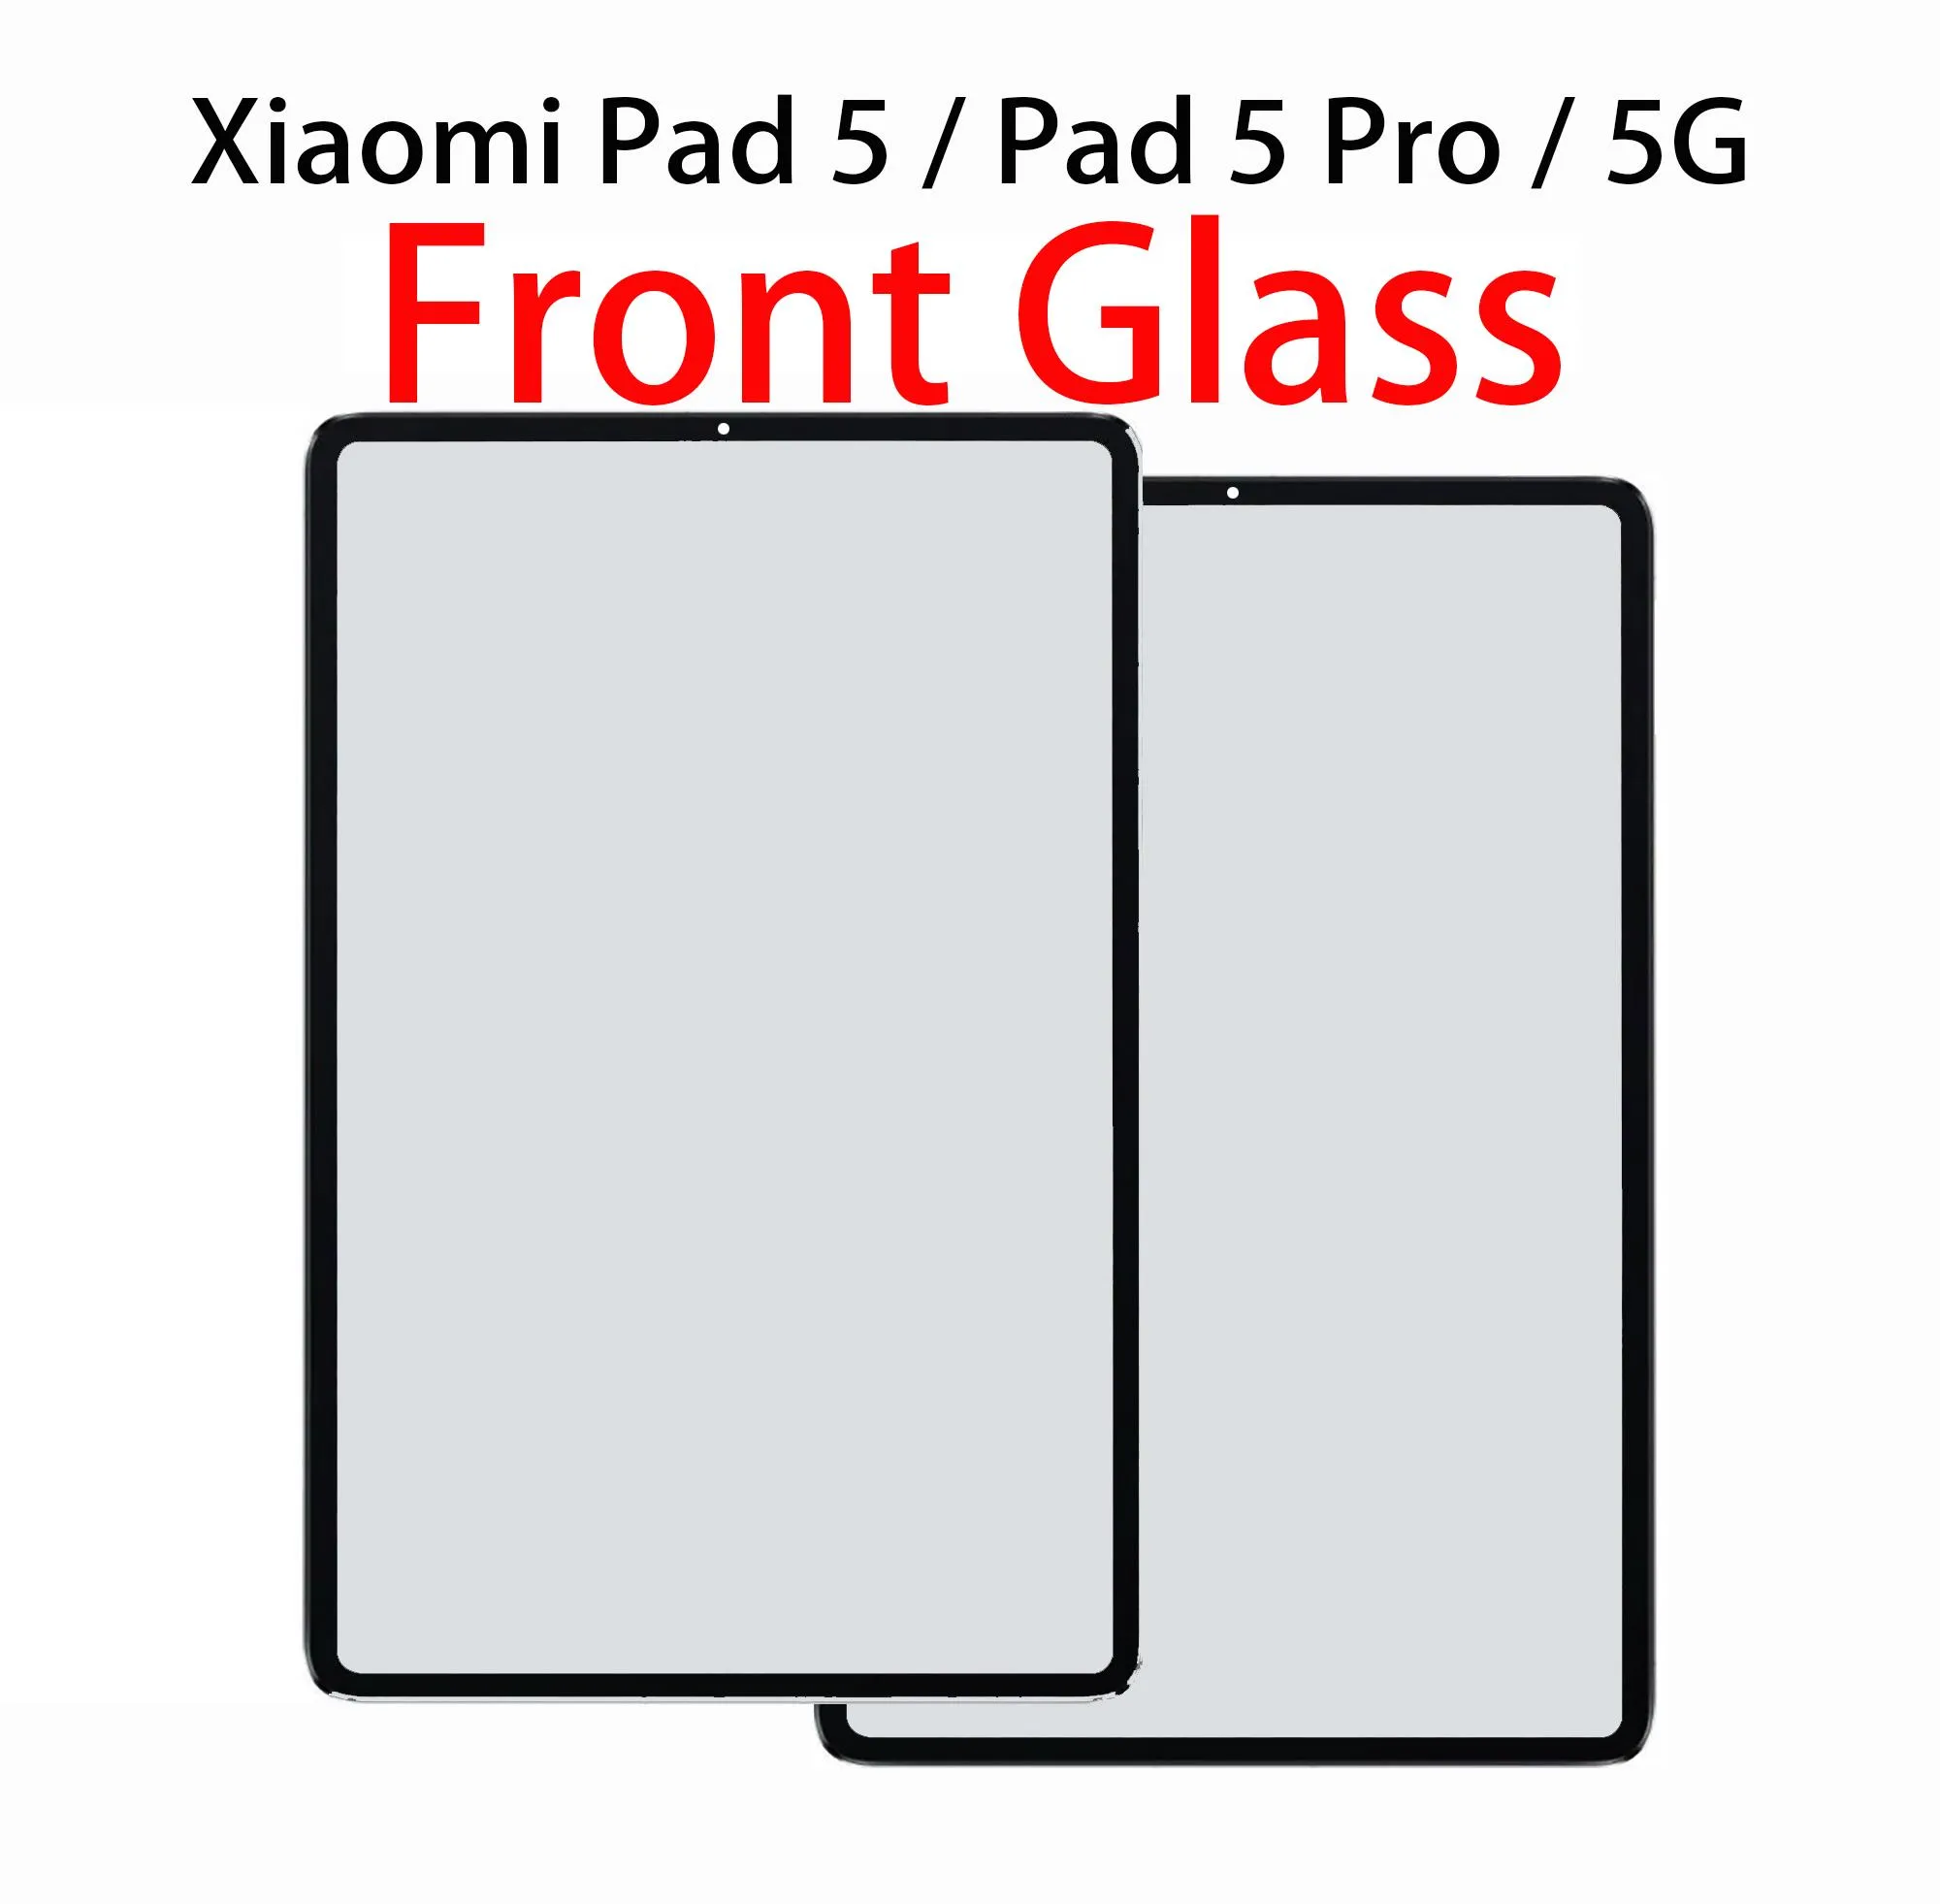 Panels New Front Glass (No Touch Digitizer) LCD Display Screen Outer Panel For Xiaomi Pad 5 / Pad 5 Pro 5G XIAOMI MI PAD 5 Replacement